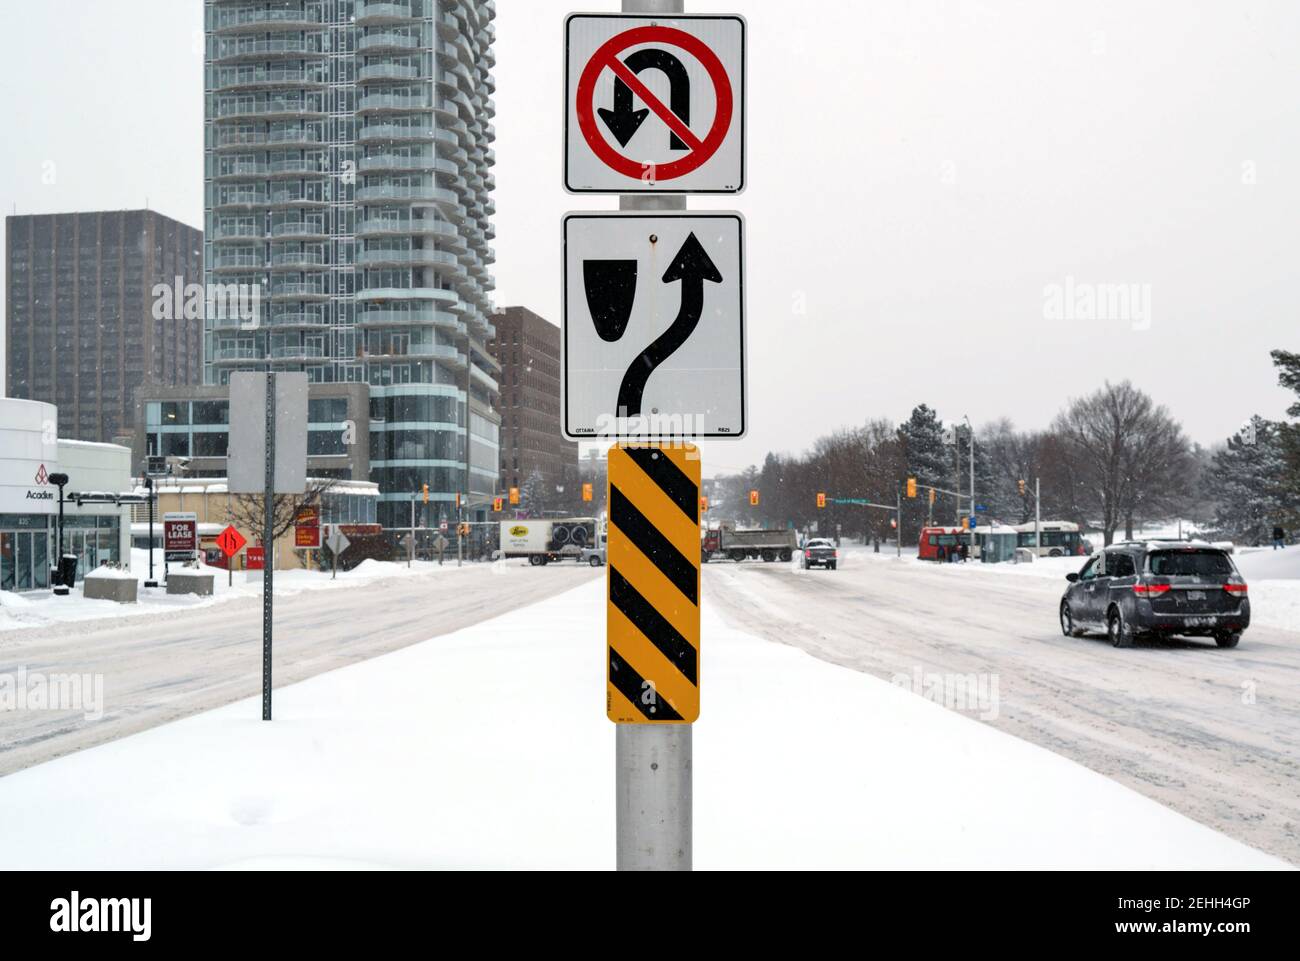 Life in a cold city - snowscapes from Ottawa - road signage on a traffic light in the middle of a snowy Carling Ave. Ontario, Canada. Stock Photo